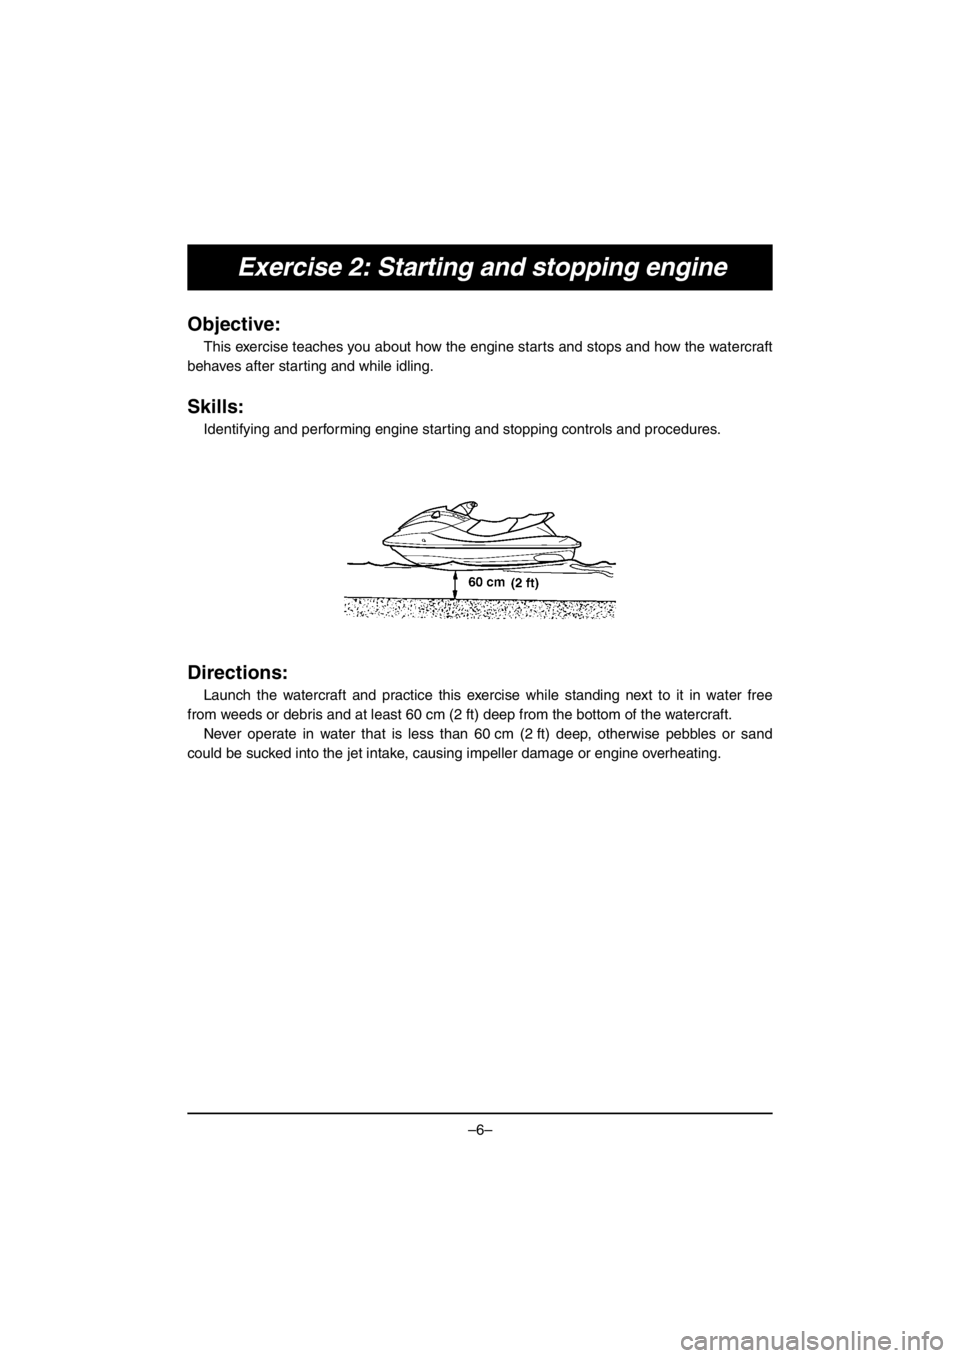 YAMAHA V1 SPORT 2016  Manual de utilização (in Portuguese) –6–
Exercise 2: Starting and stopping engine
Objective:
This exercise teaches you about how the engine starts and stops and how the watercraft
behaves after starting and while idling.
Skills:
Iden